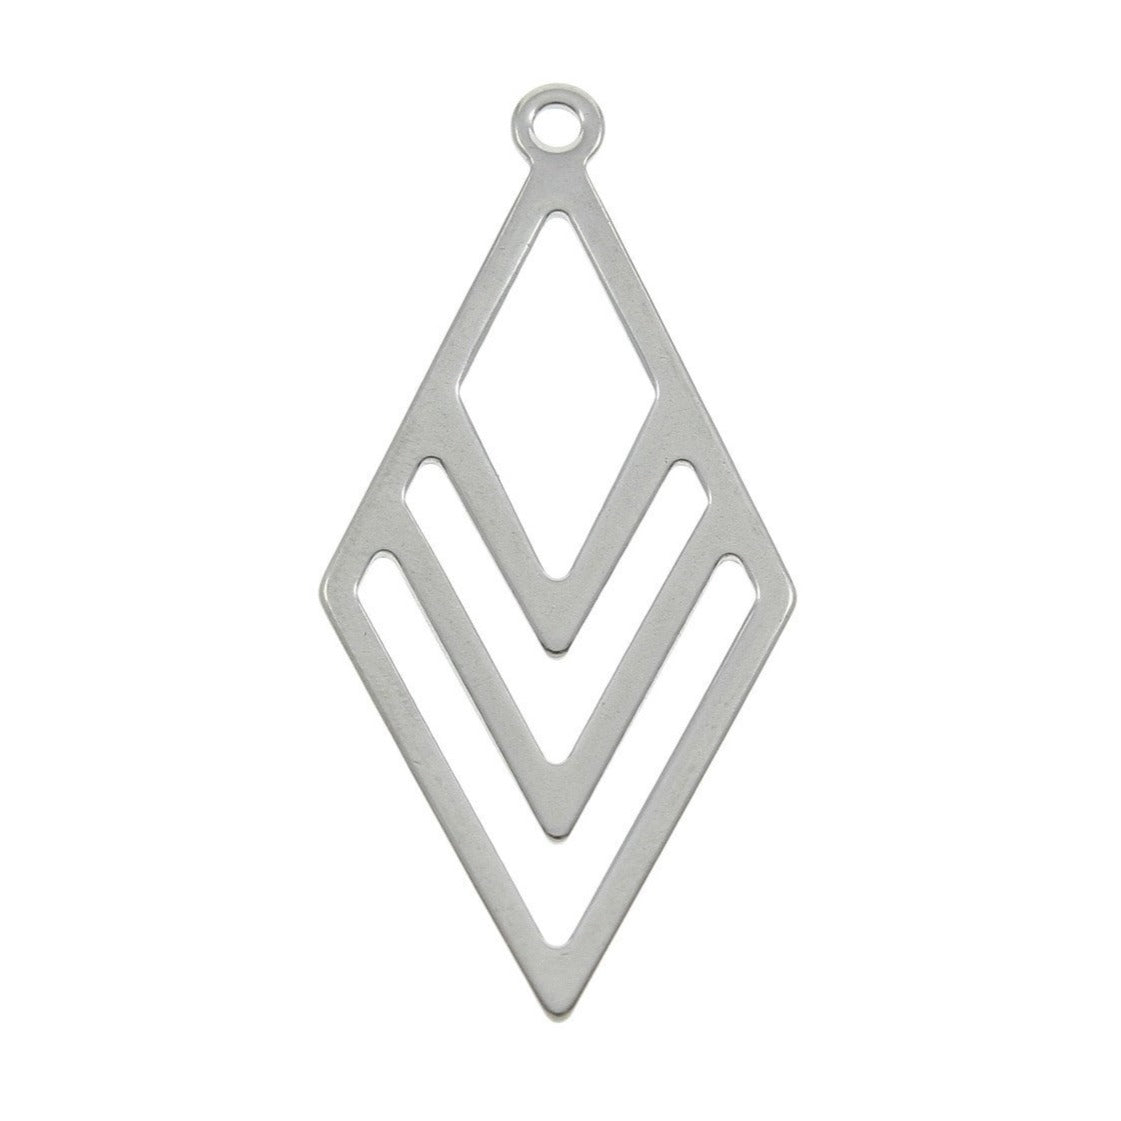 2 Rhombus pendant stainless steel 40mm charms